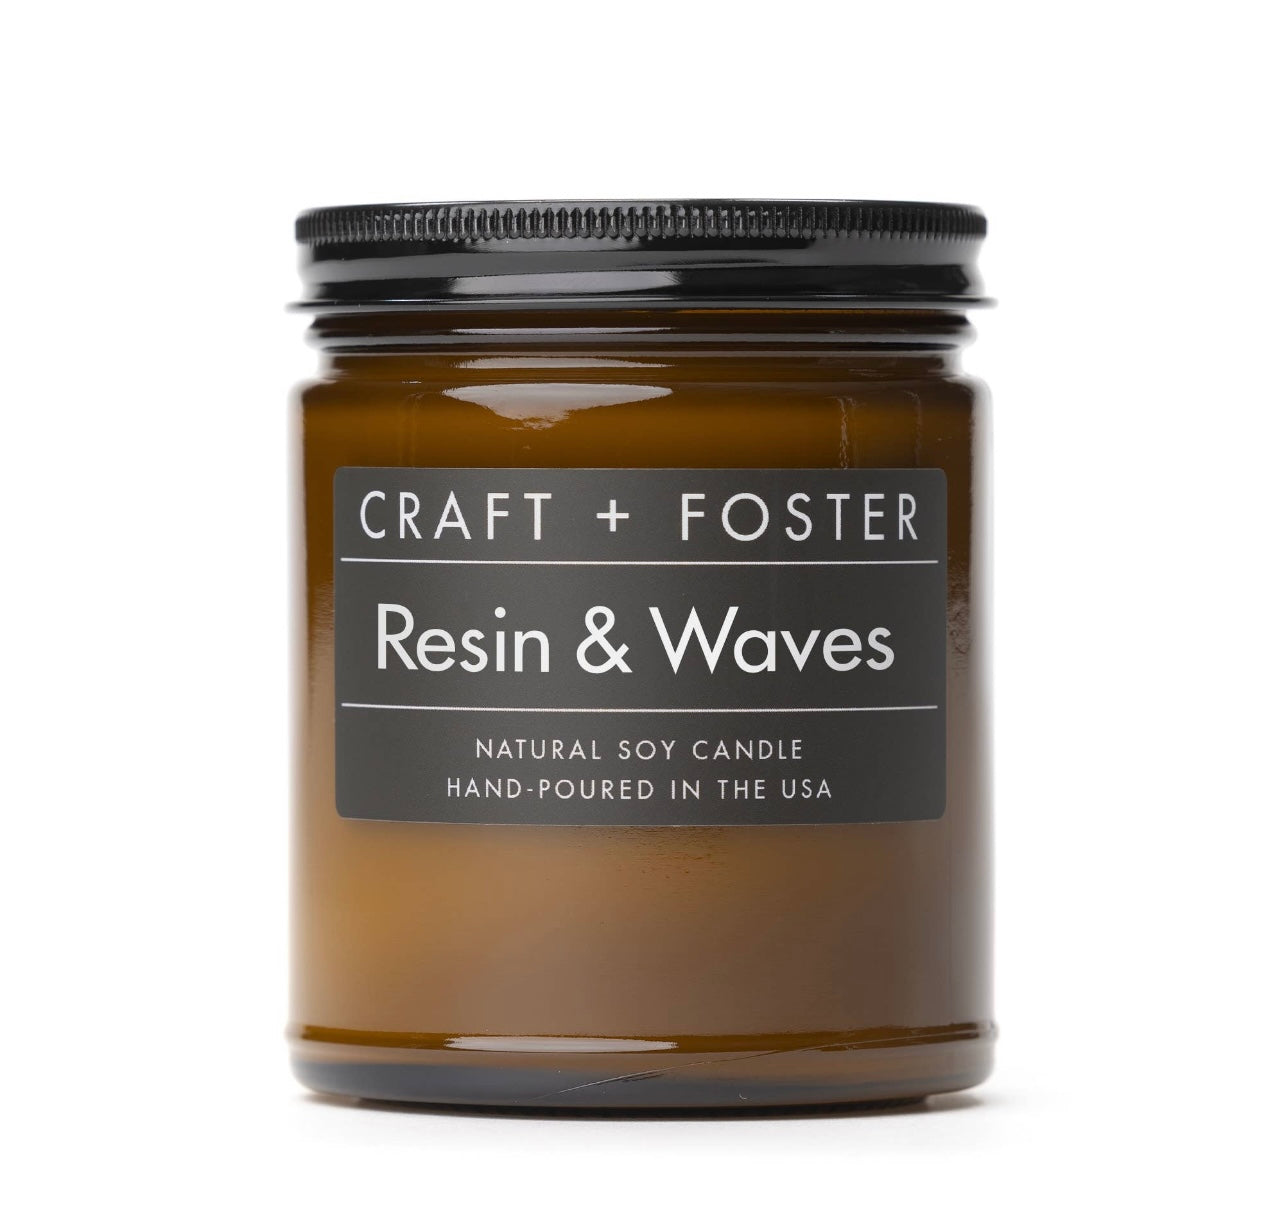 Resin & Waves Natural Soy Candle